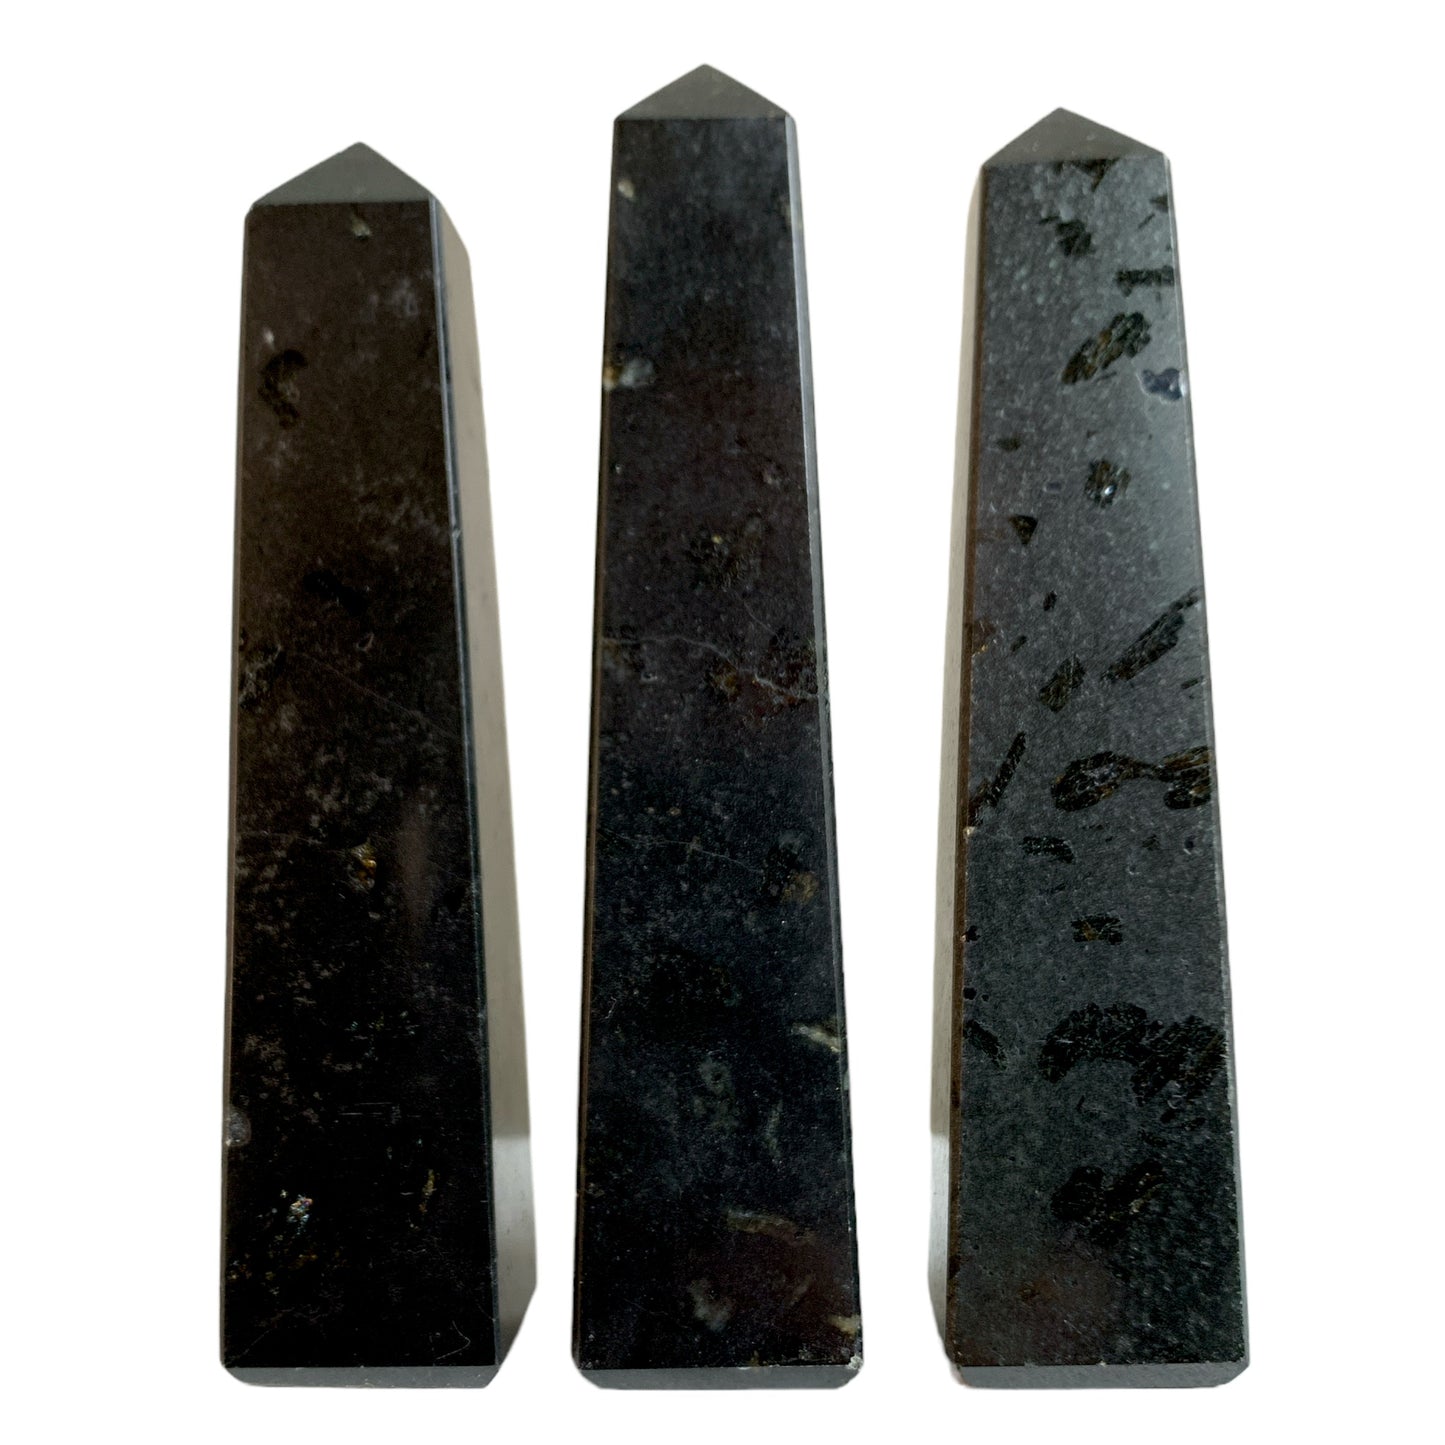 Black Tourmaline - Tower Polished Points - 2.5 to 4.5 inches - Price per gram per piece (B2B ordering 1 = 1 Tower so we charge Ex. 60g = $6 each)